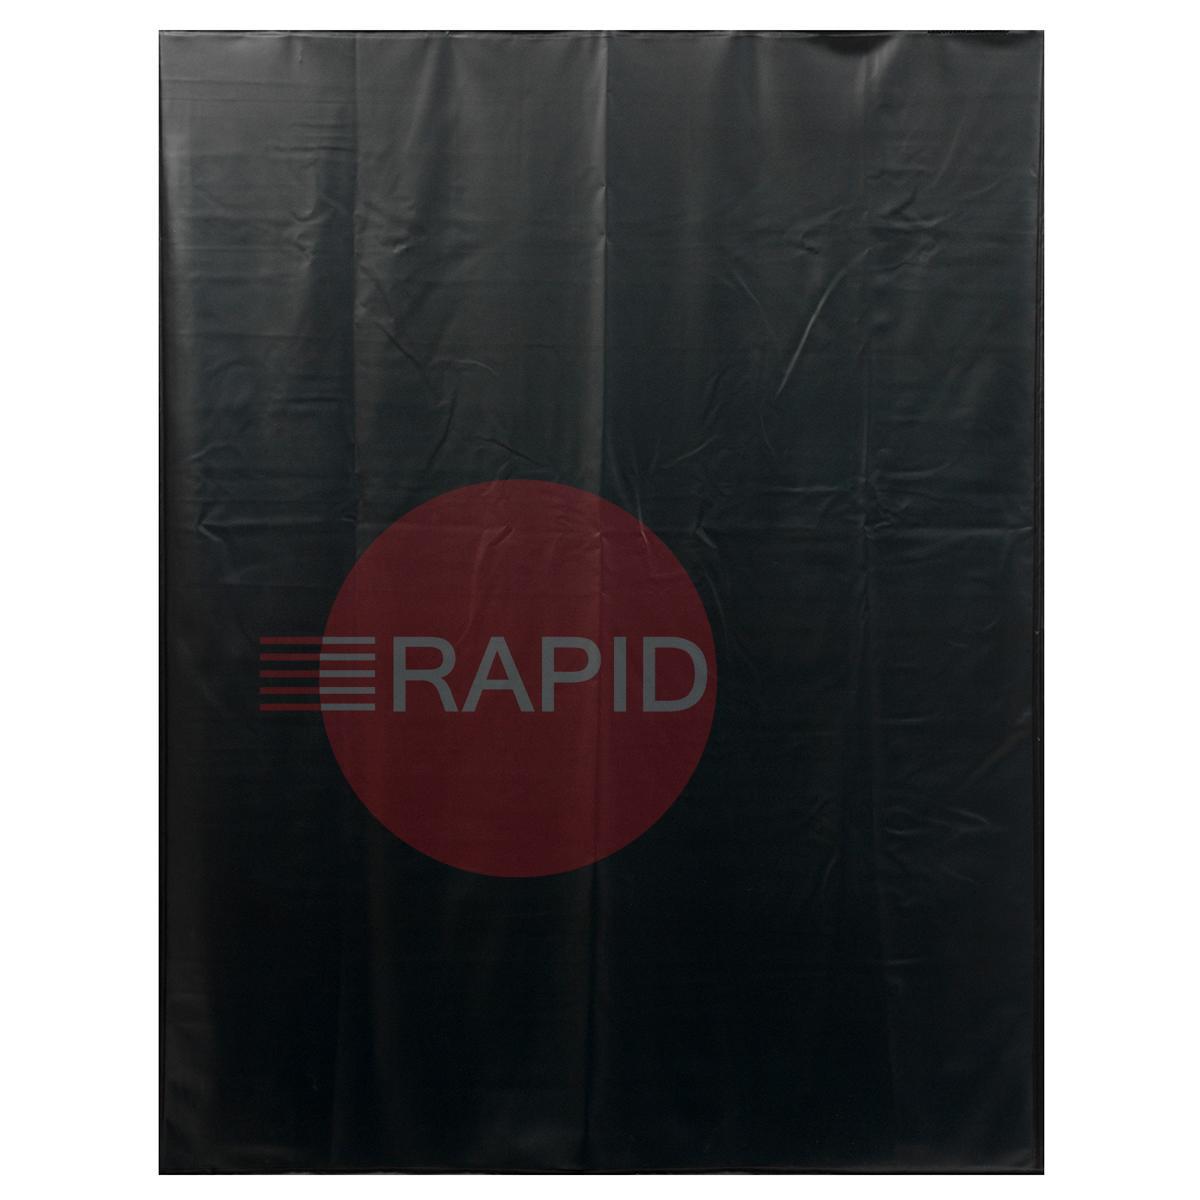 18.19.18.0001  CEPRO Green-9 Replacement Curtain Set for Robusto Triptych Welding Screens - 3.6m x 1.8m, Approved EN 25980